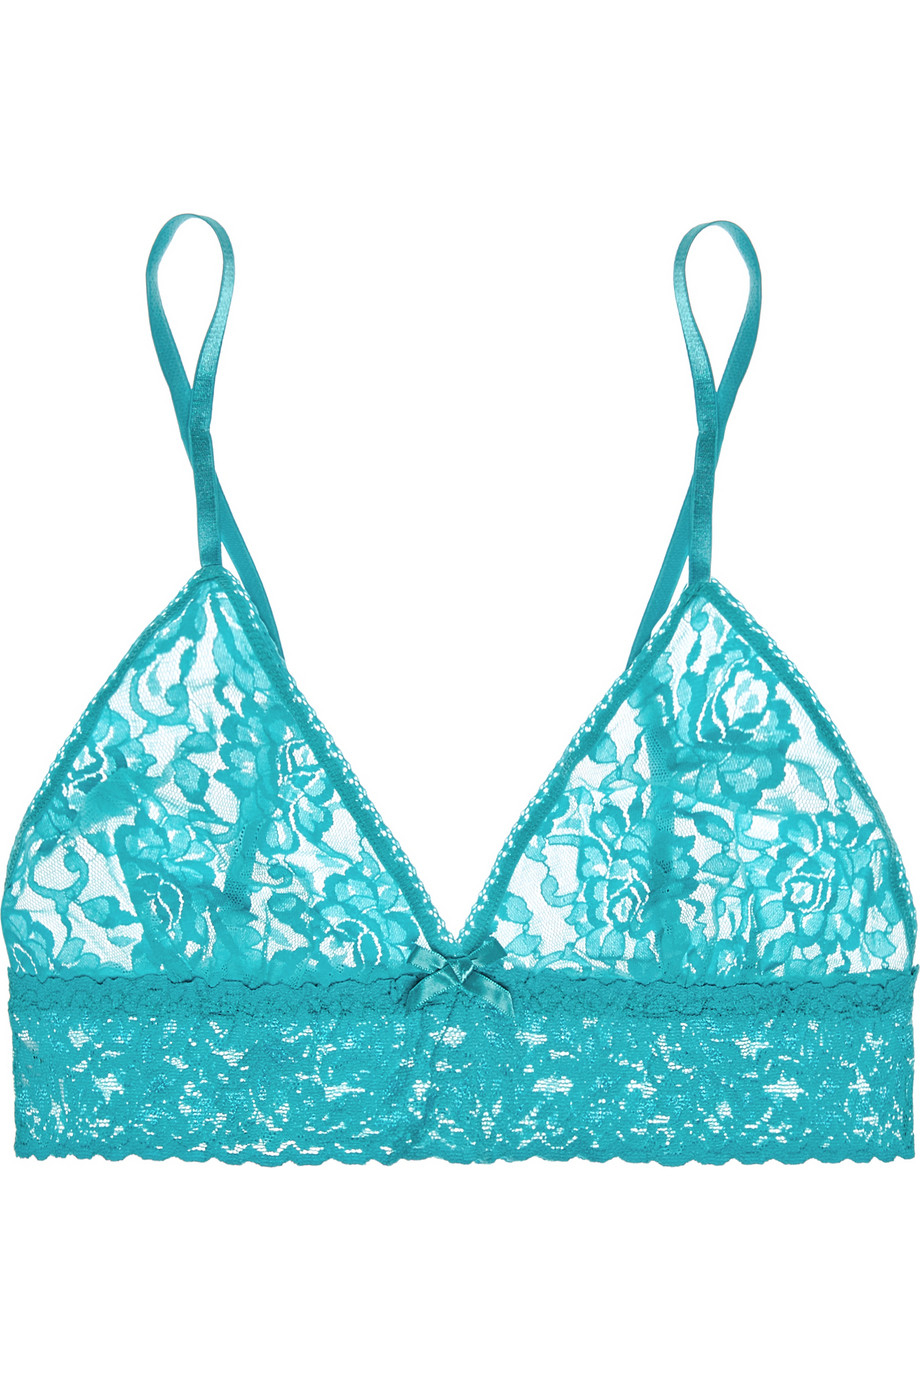 Hanky Panky Signature Stretch-Lace Soft-Cup Bra in Blue - Lyst